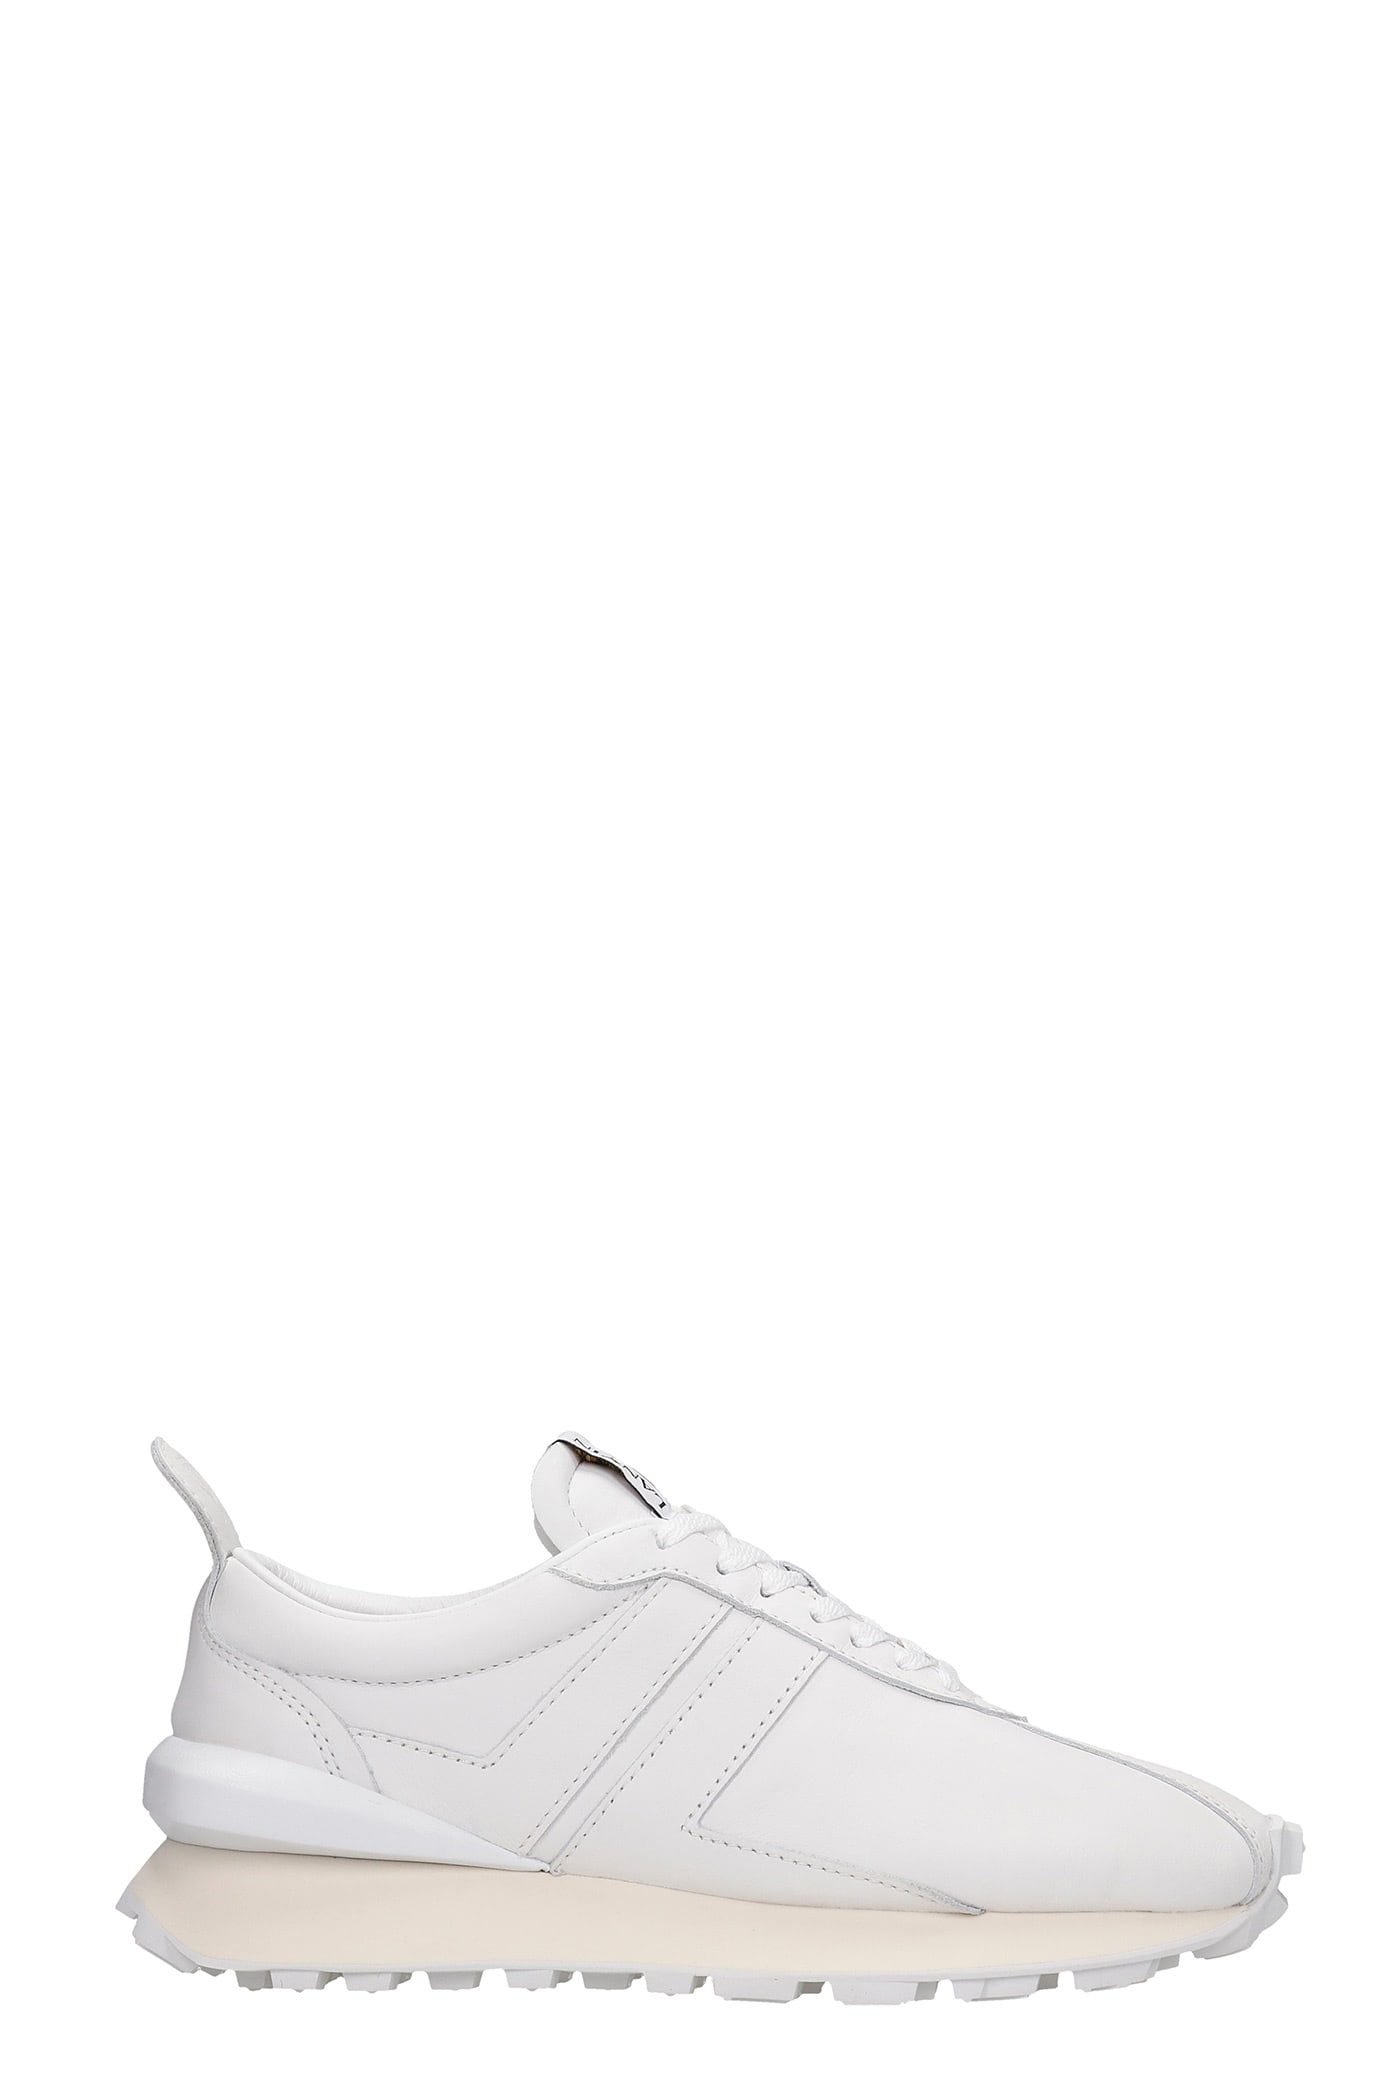 Lanvin Bumpr Sneakers In White Leather